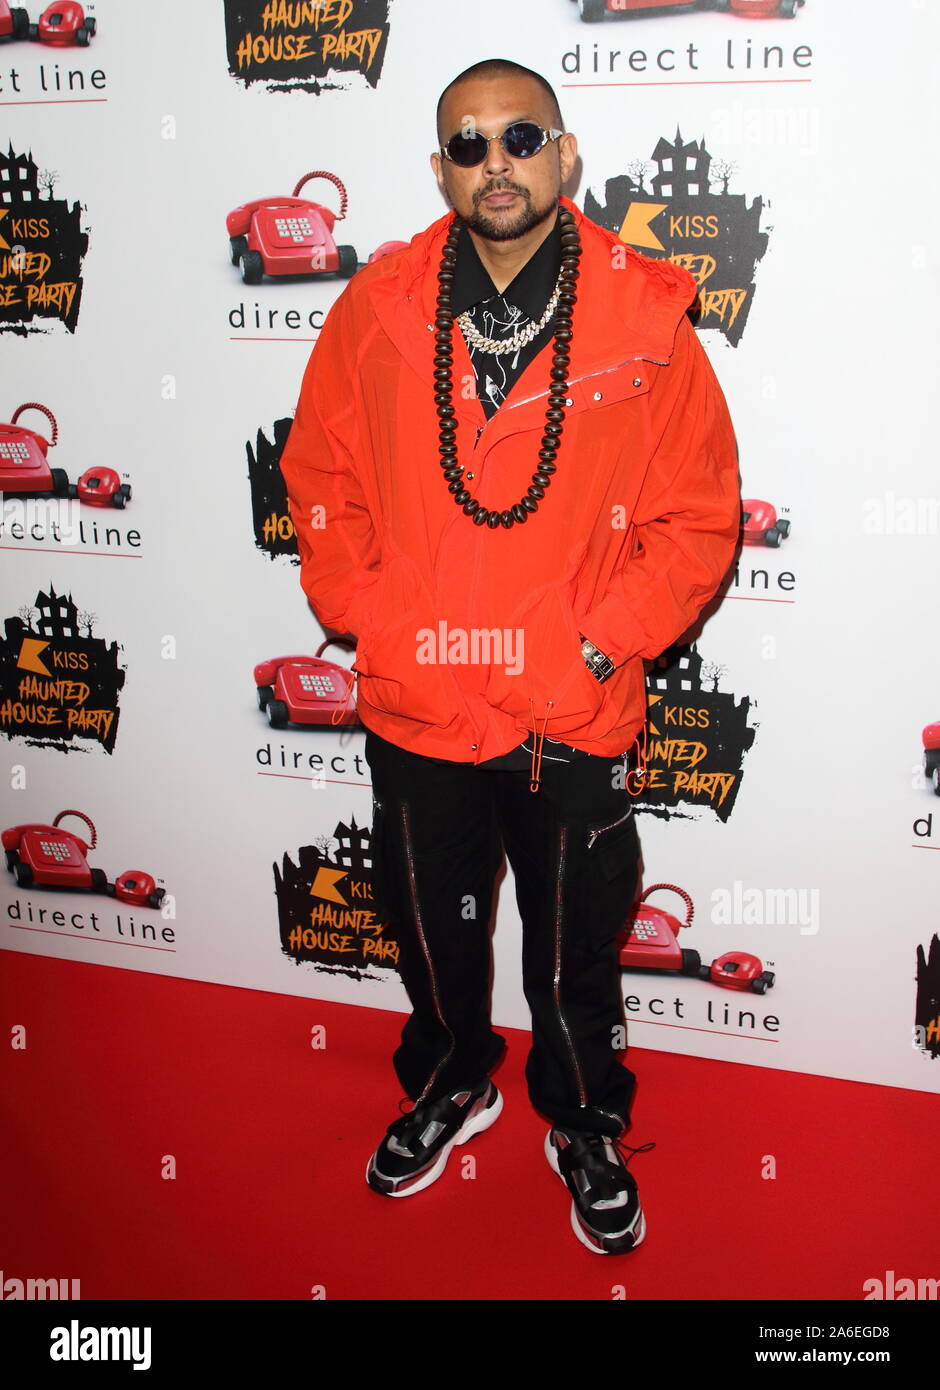 Sean Paul bei der KISS Haunted House Party in der SSE, Wembley Arena in London. Stockfoto